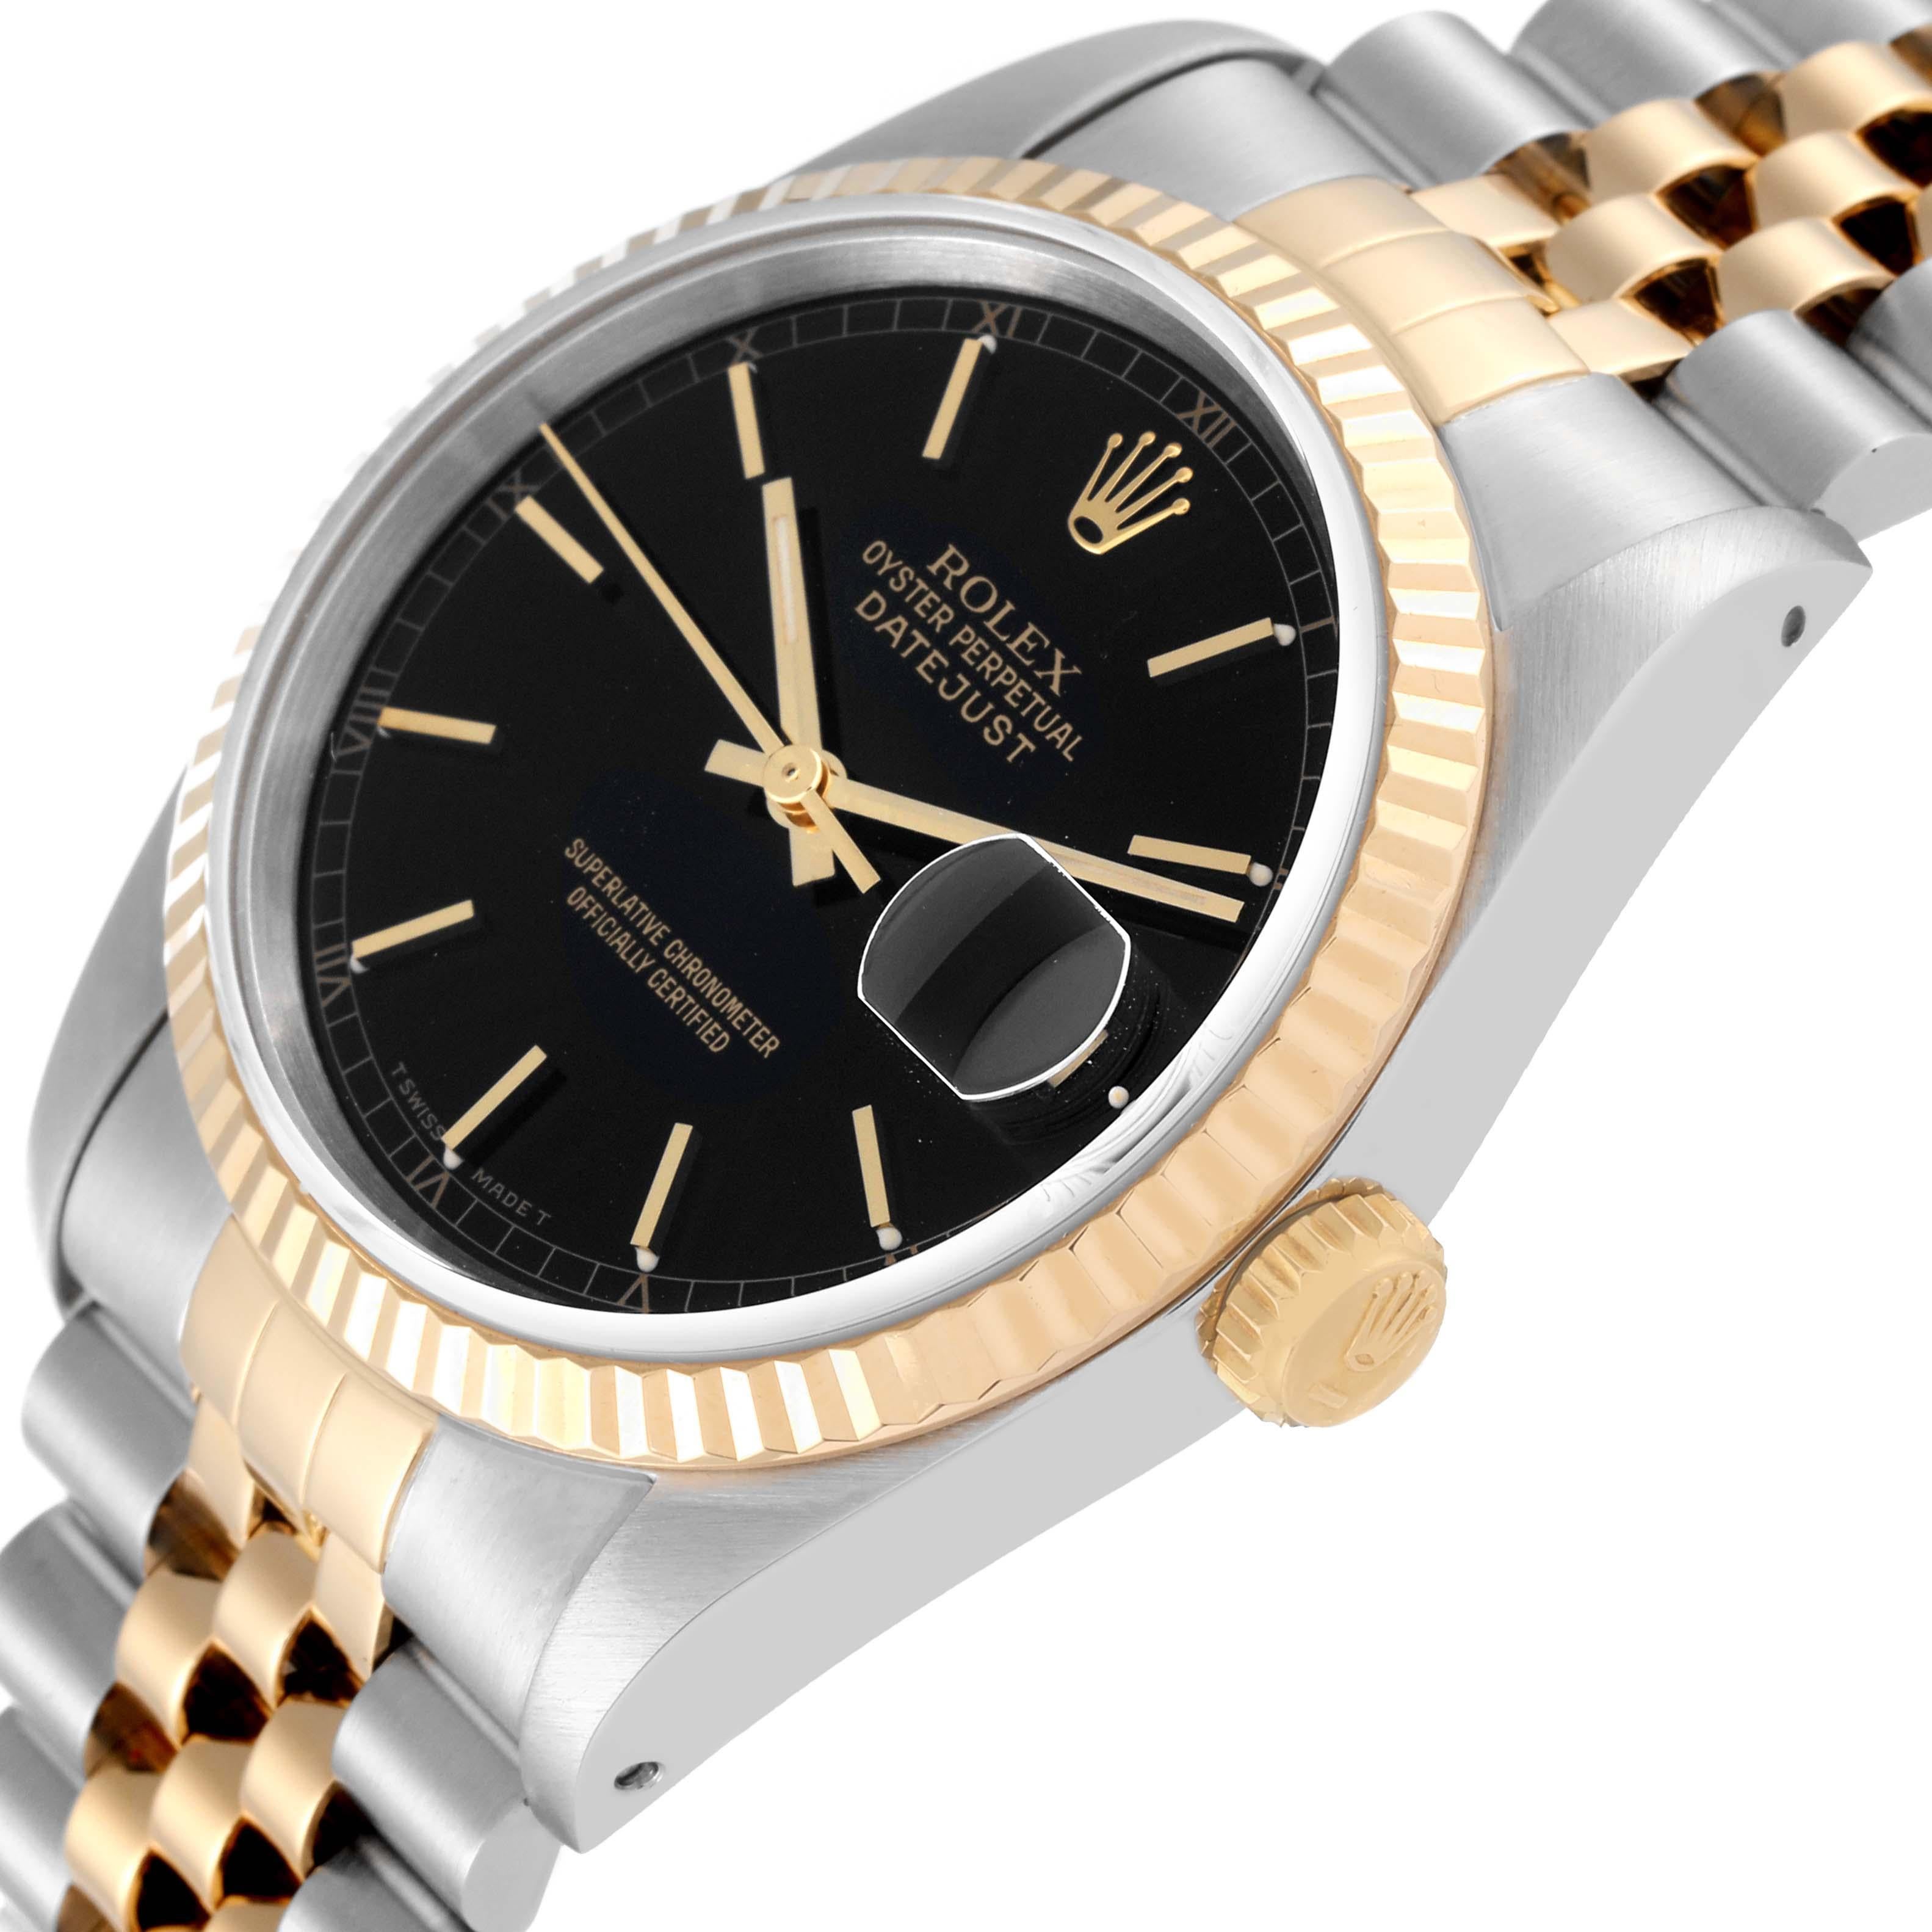 Rolex Datejust 36 Steel Yellow Gold Black Dial Mens Watch 16233 Box Papers 1